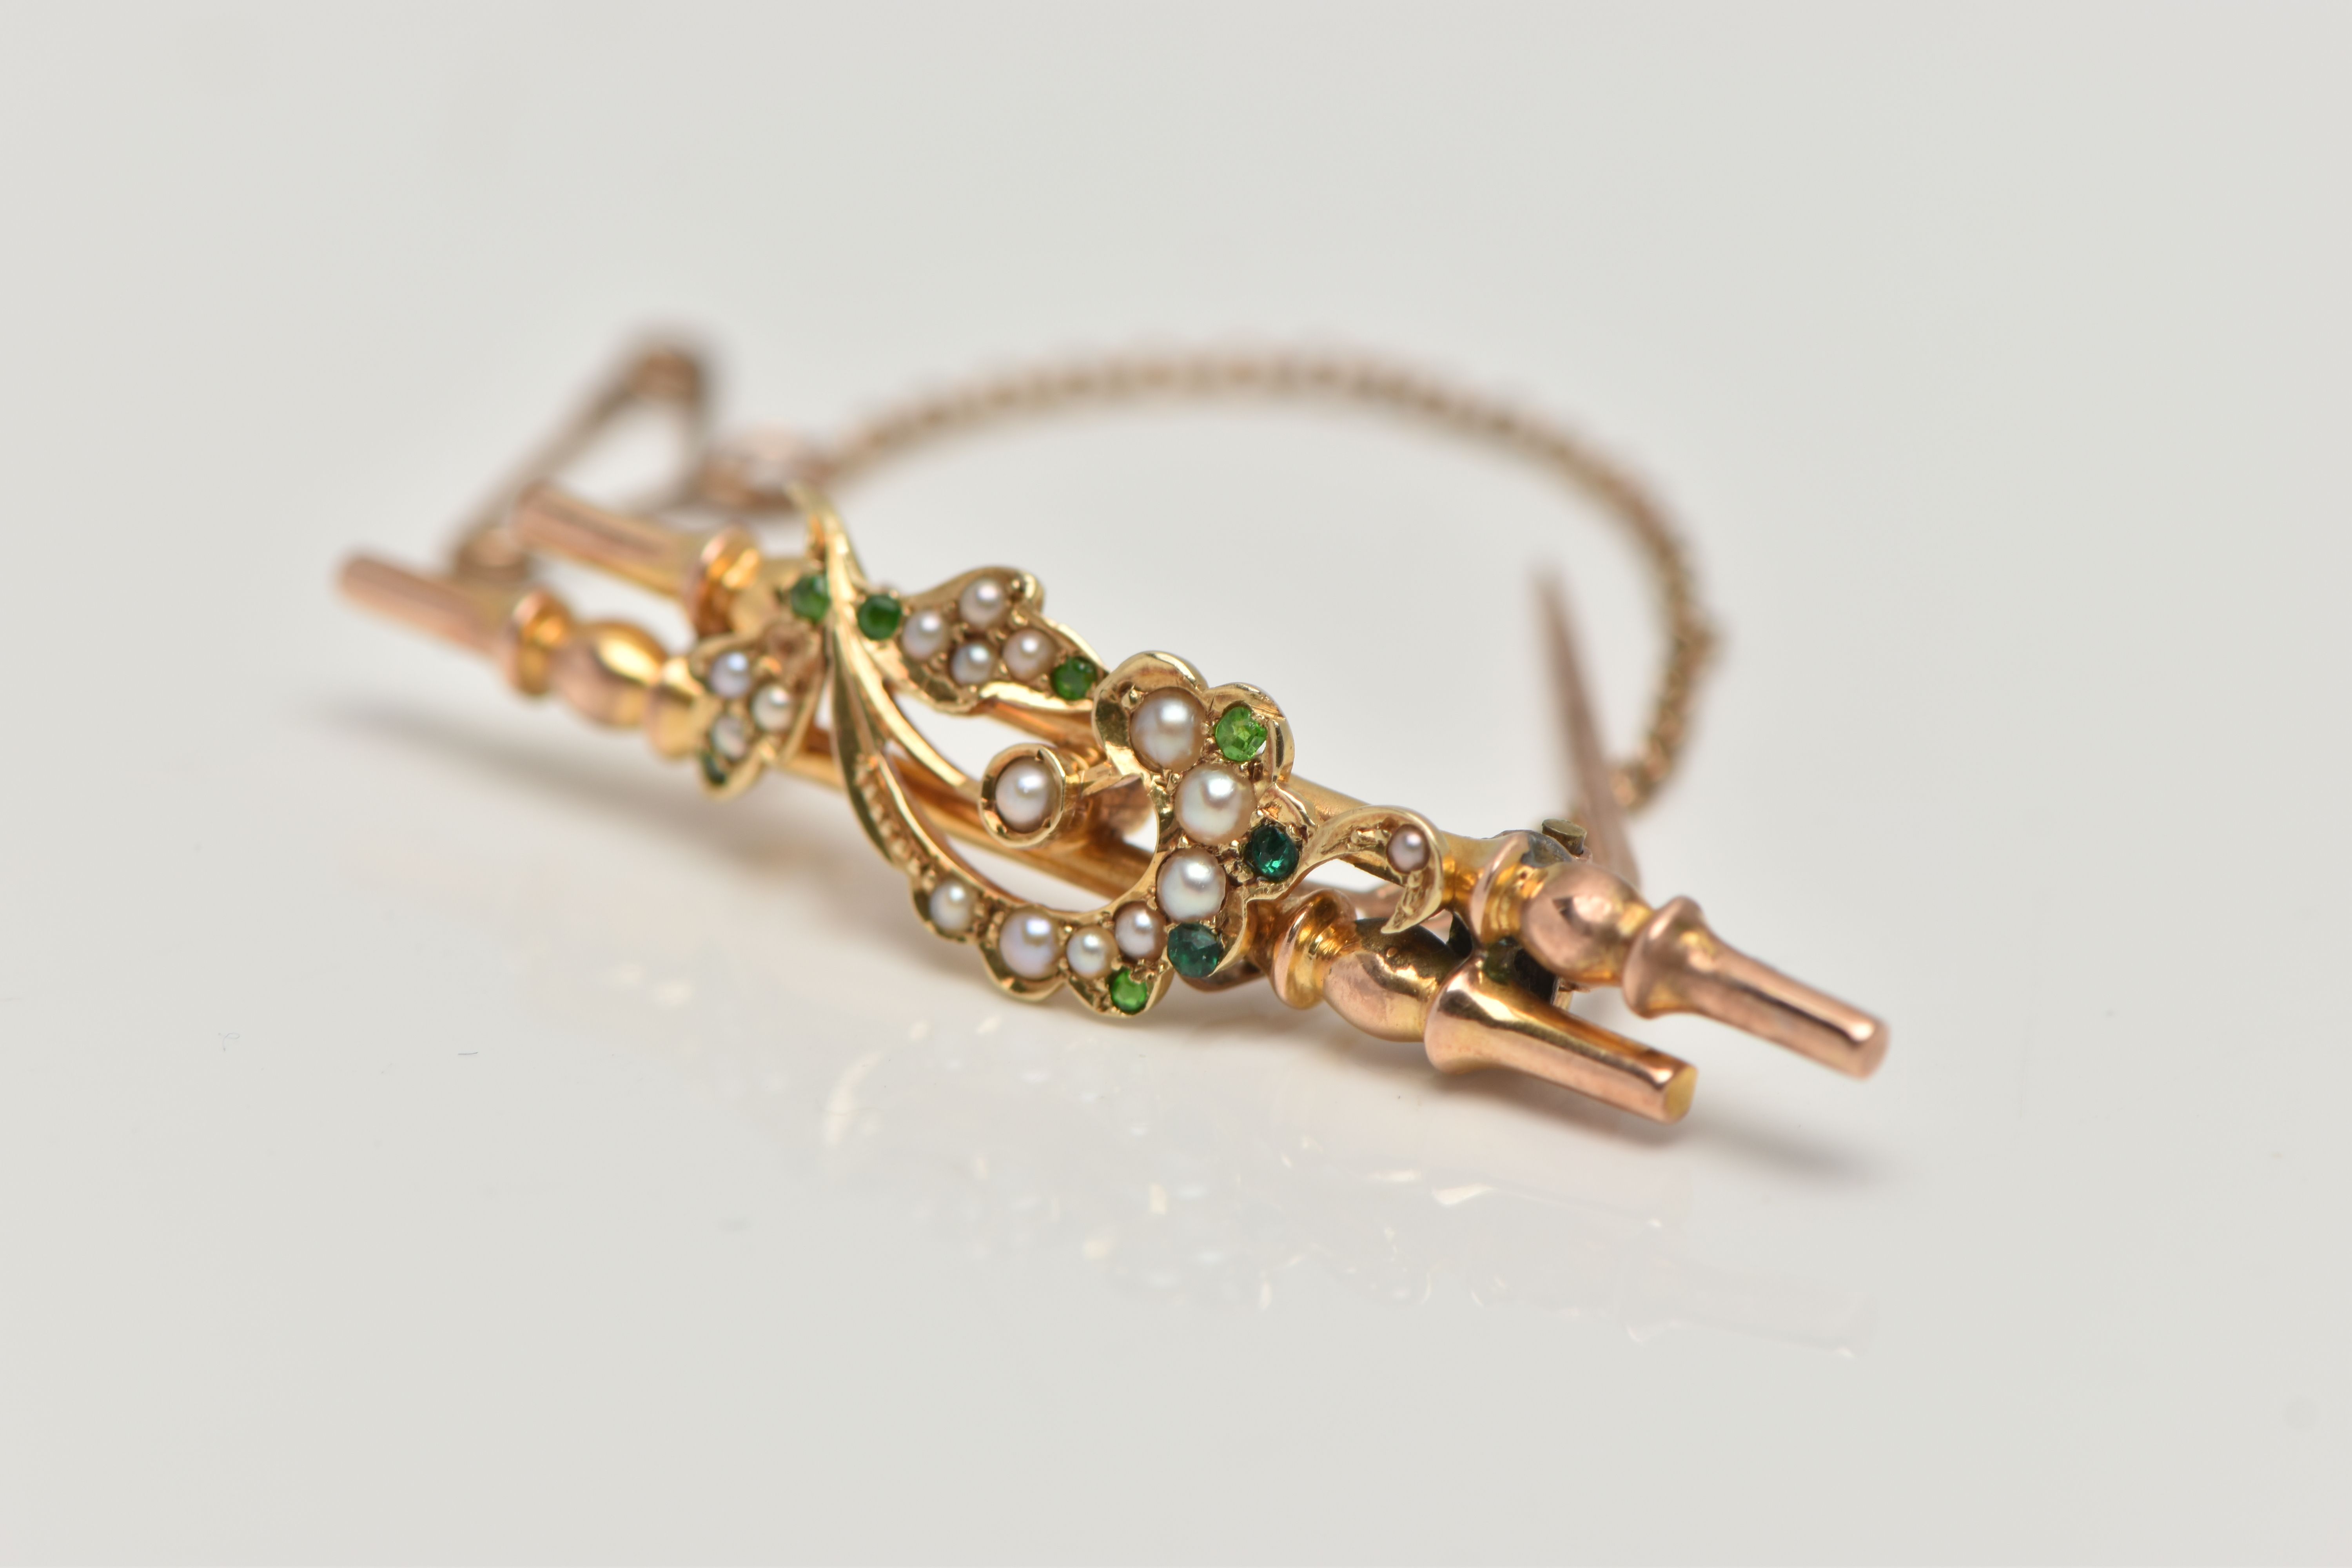 A YELLOW METAL BROOCH, double bar brooch with floral detailing, set with green stones assessed as - Image 2 of 4